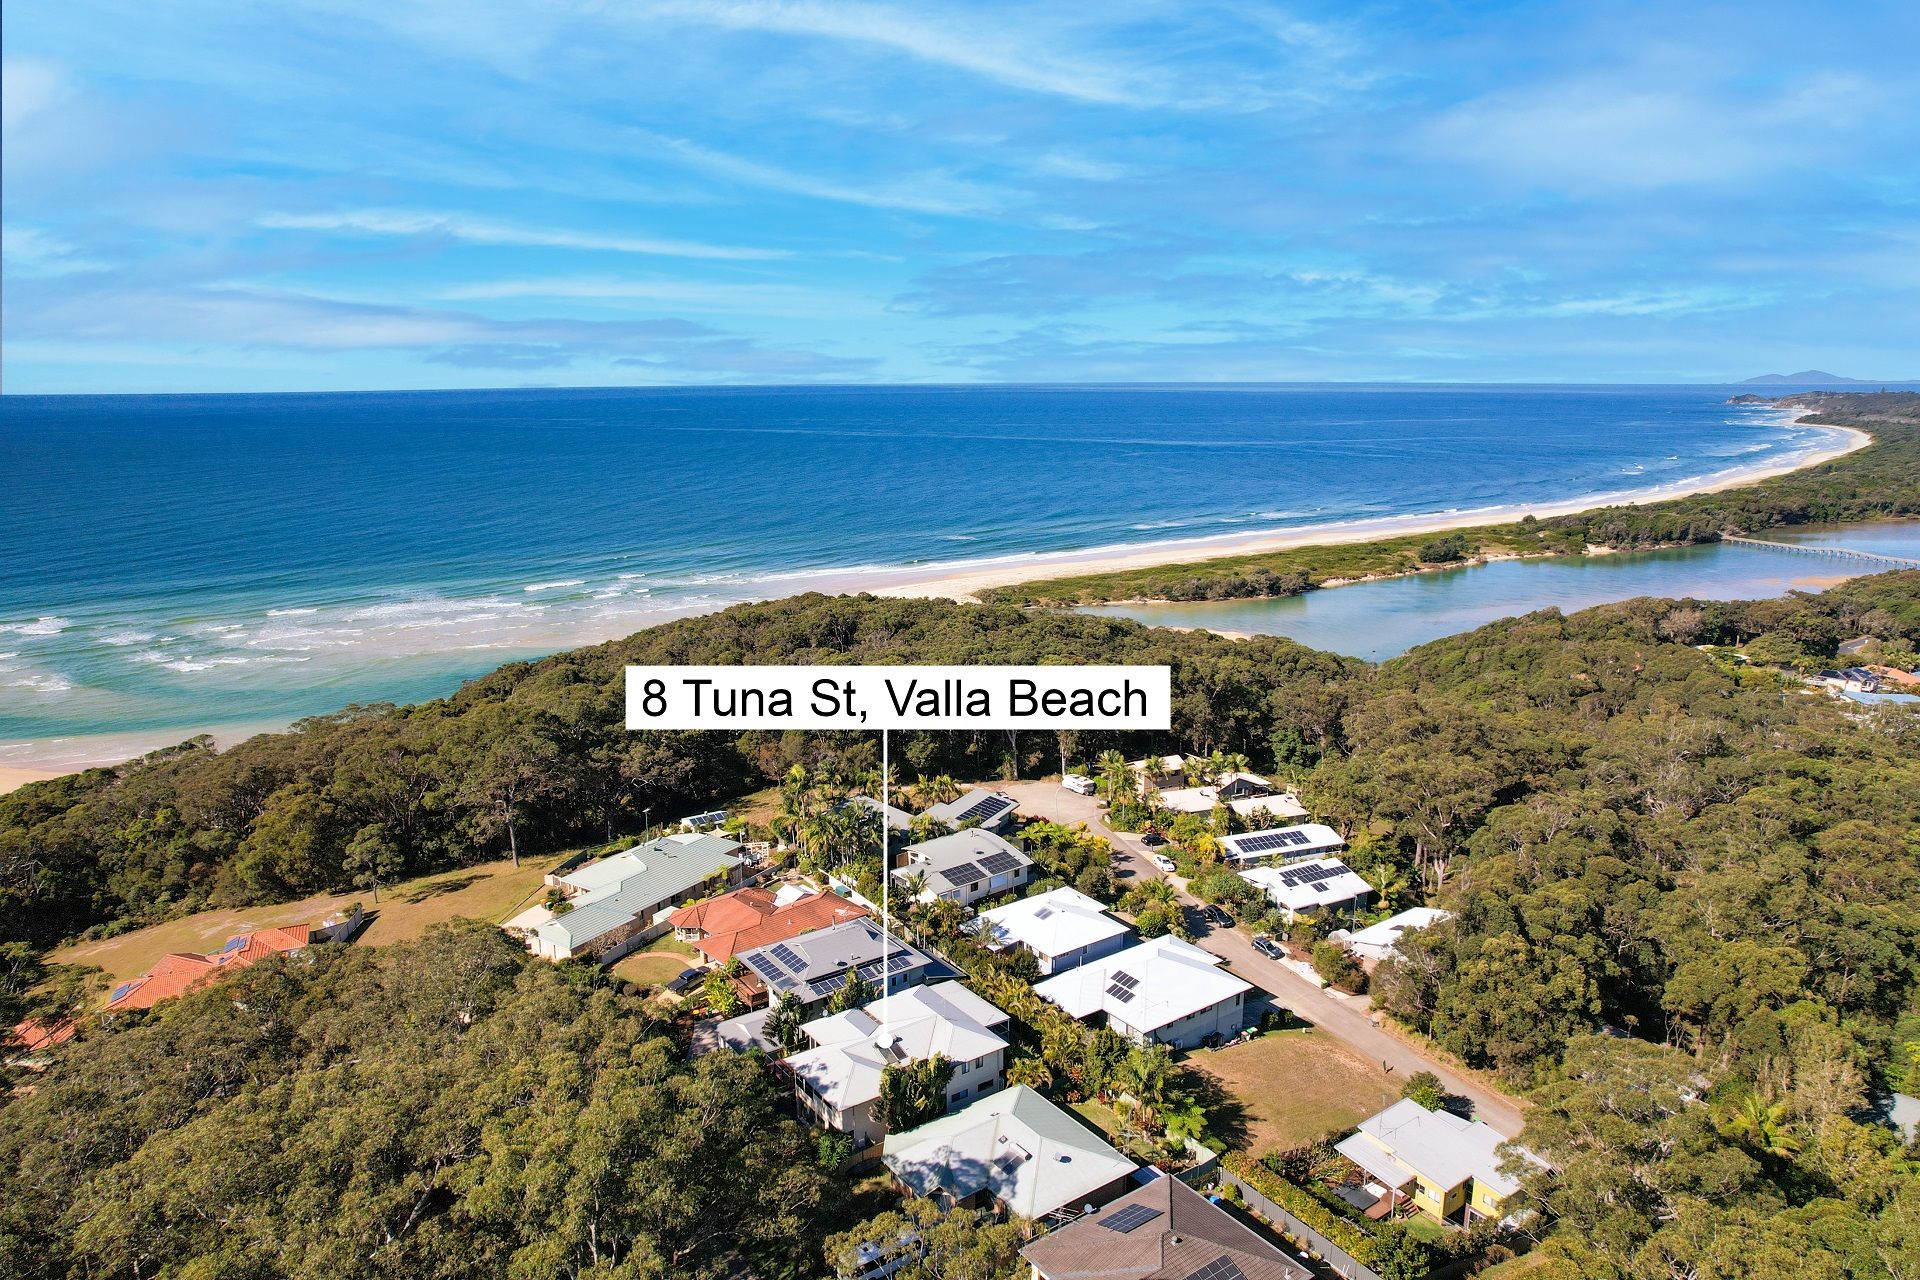 Valla Beach Real Estate: Perched on a hill looking over the ocean 